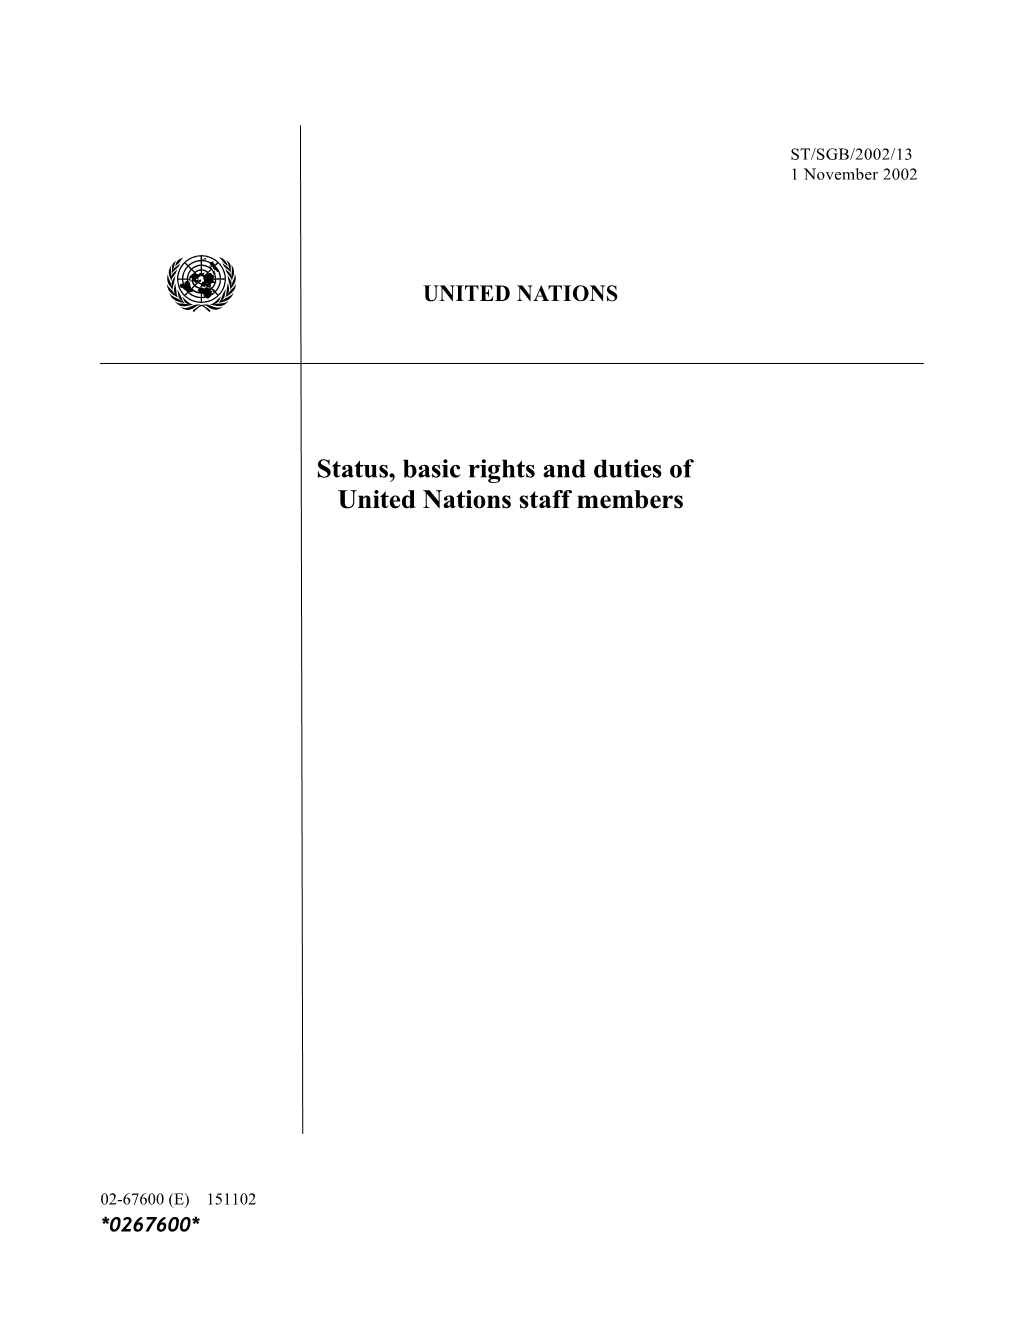 27 Status, Basic Rights and Duties of United Nations Staff Members